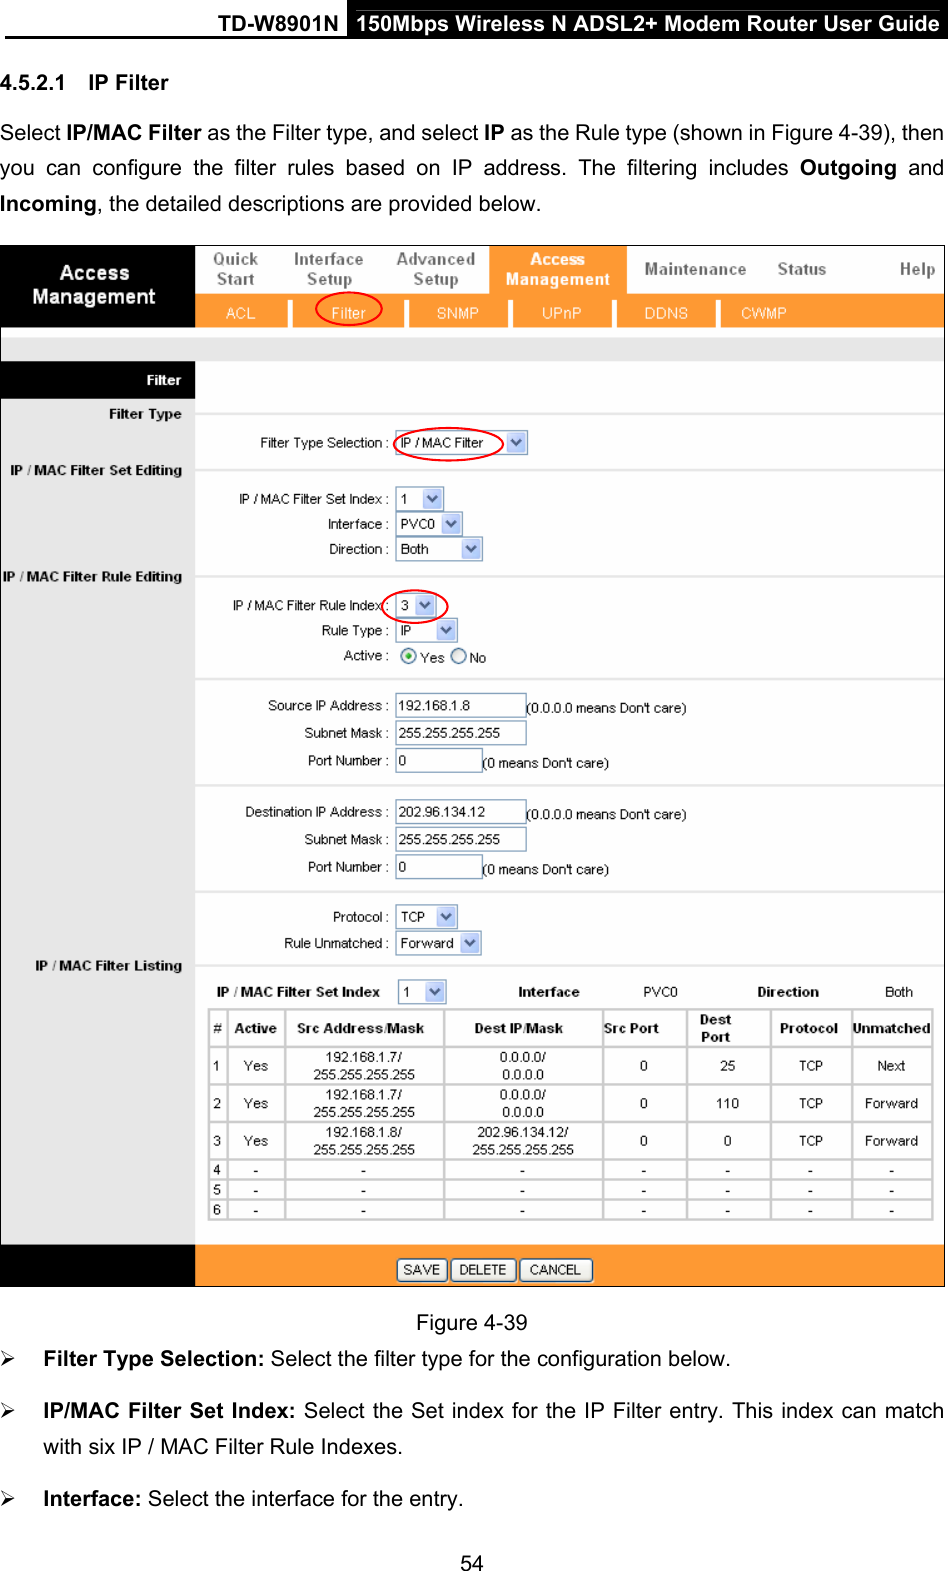 TD-W8901N  150Mbps Wireless N ADSL2+ Modem Router User Guide 54 4.5.2.1  IP Filter Select IP/MAC Filter as the Filter type, and select IP as the Rule type (shown in Figure 4-39), then you can configure the filter rules based on IP address. The filtering includes Outgoing  and Incoming, the detailed descriptions are provided below.  Figure 4-39  Filter Type Selection: Select the filter type for the configuration below.  IP/MAC Filter Set Index: Select the Set index for the IP Filter entry. This index can match with six IP / MAC Filter Rule Indexes.  Interface: Select the interface for the entry. 